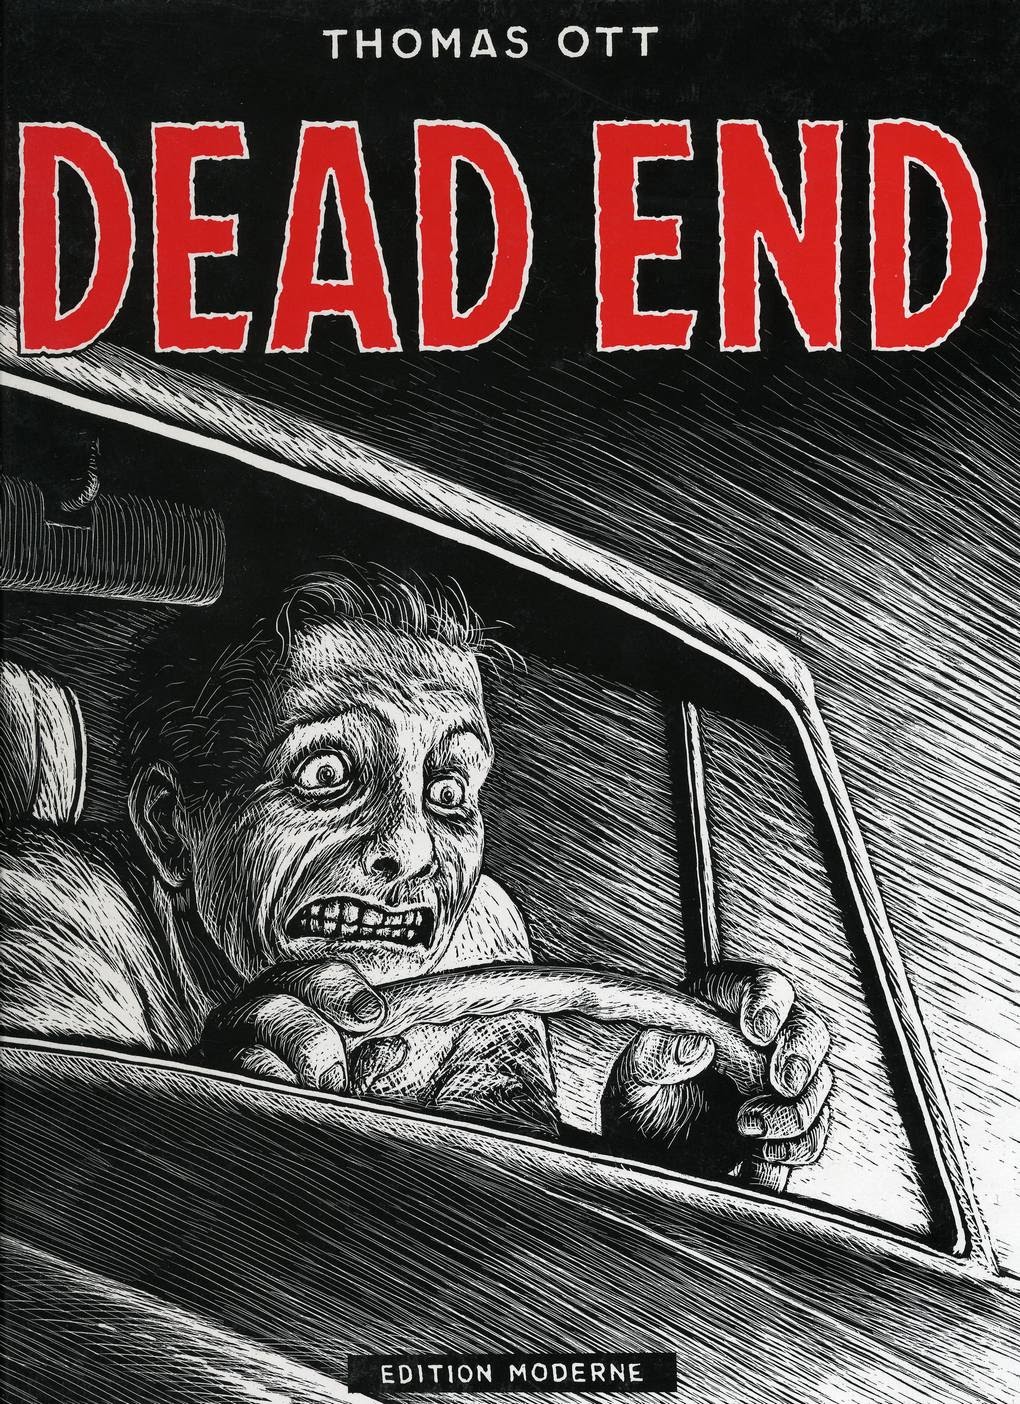 Read online Dead End comic -  Issue # Full - 1